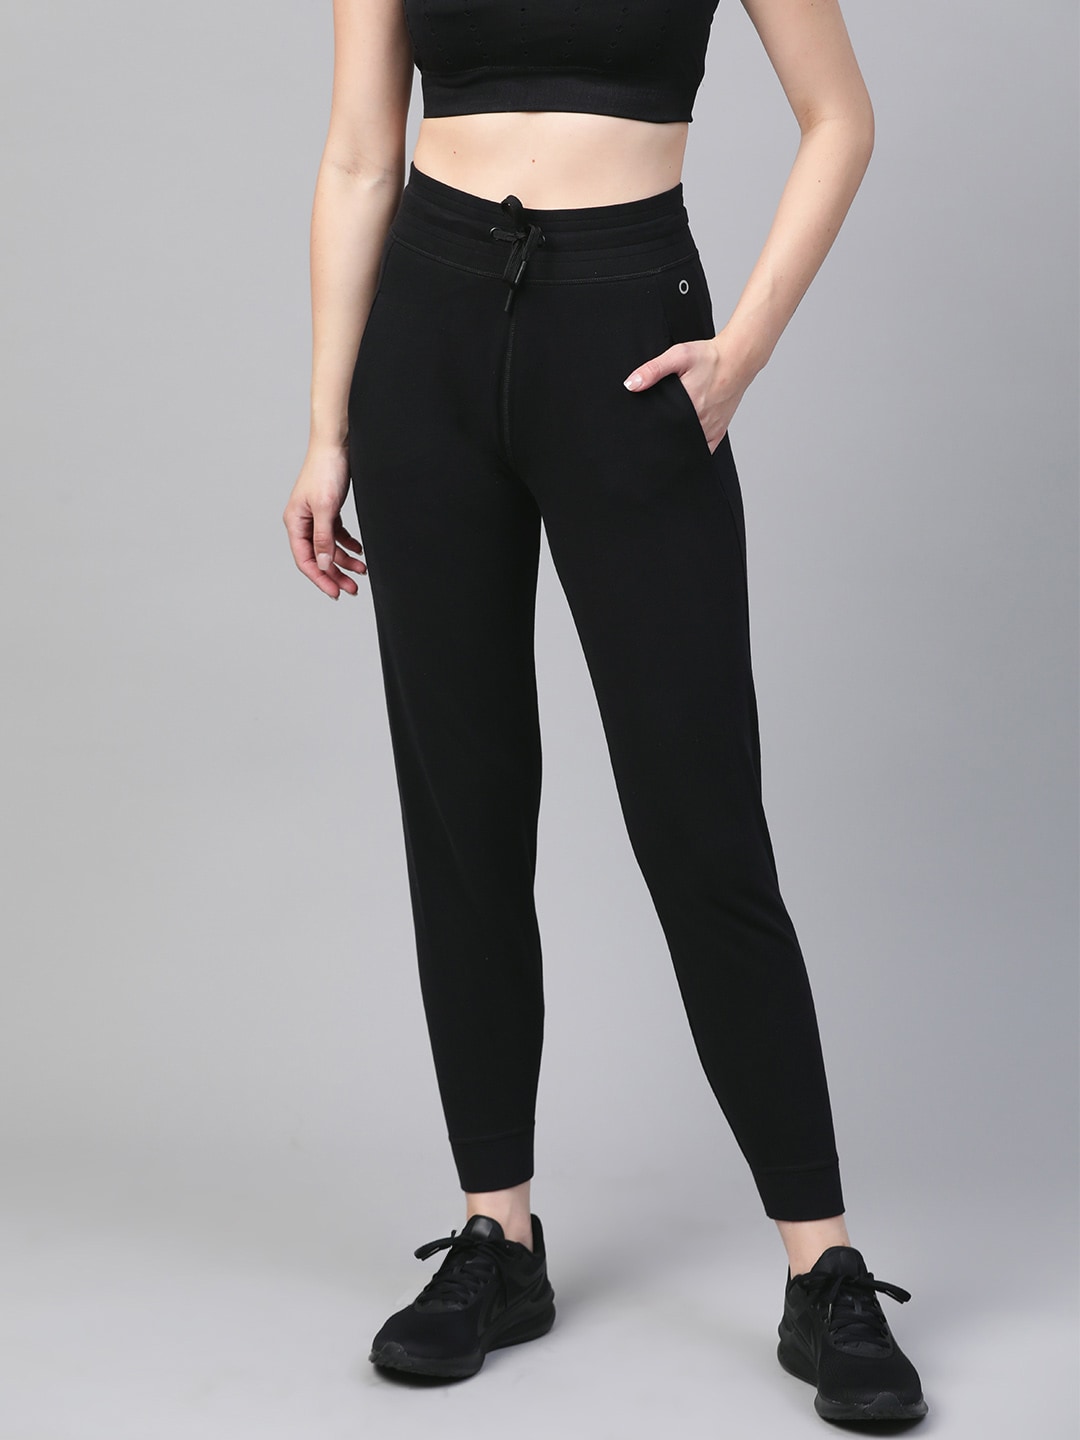 Marks & Spencer Women Black Solid Joggers Price in India